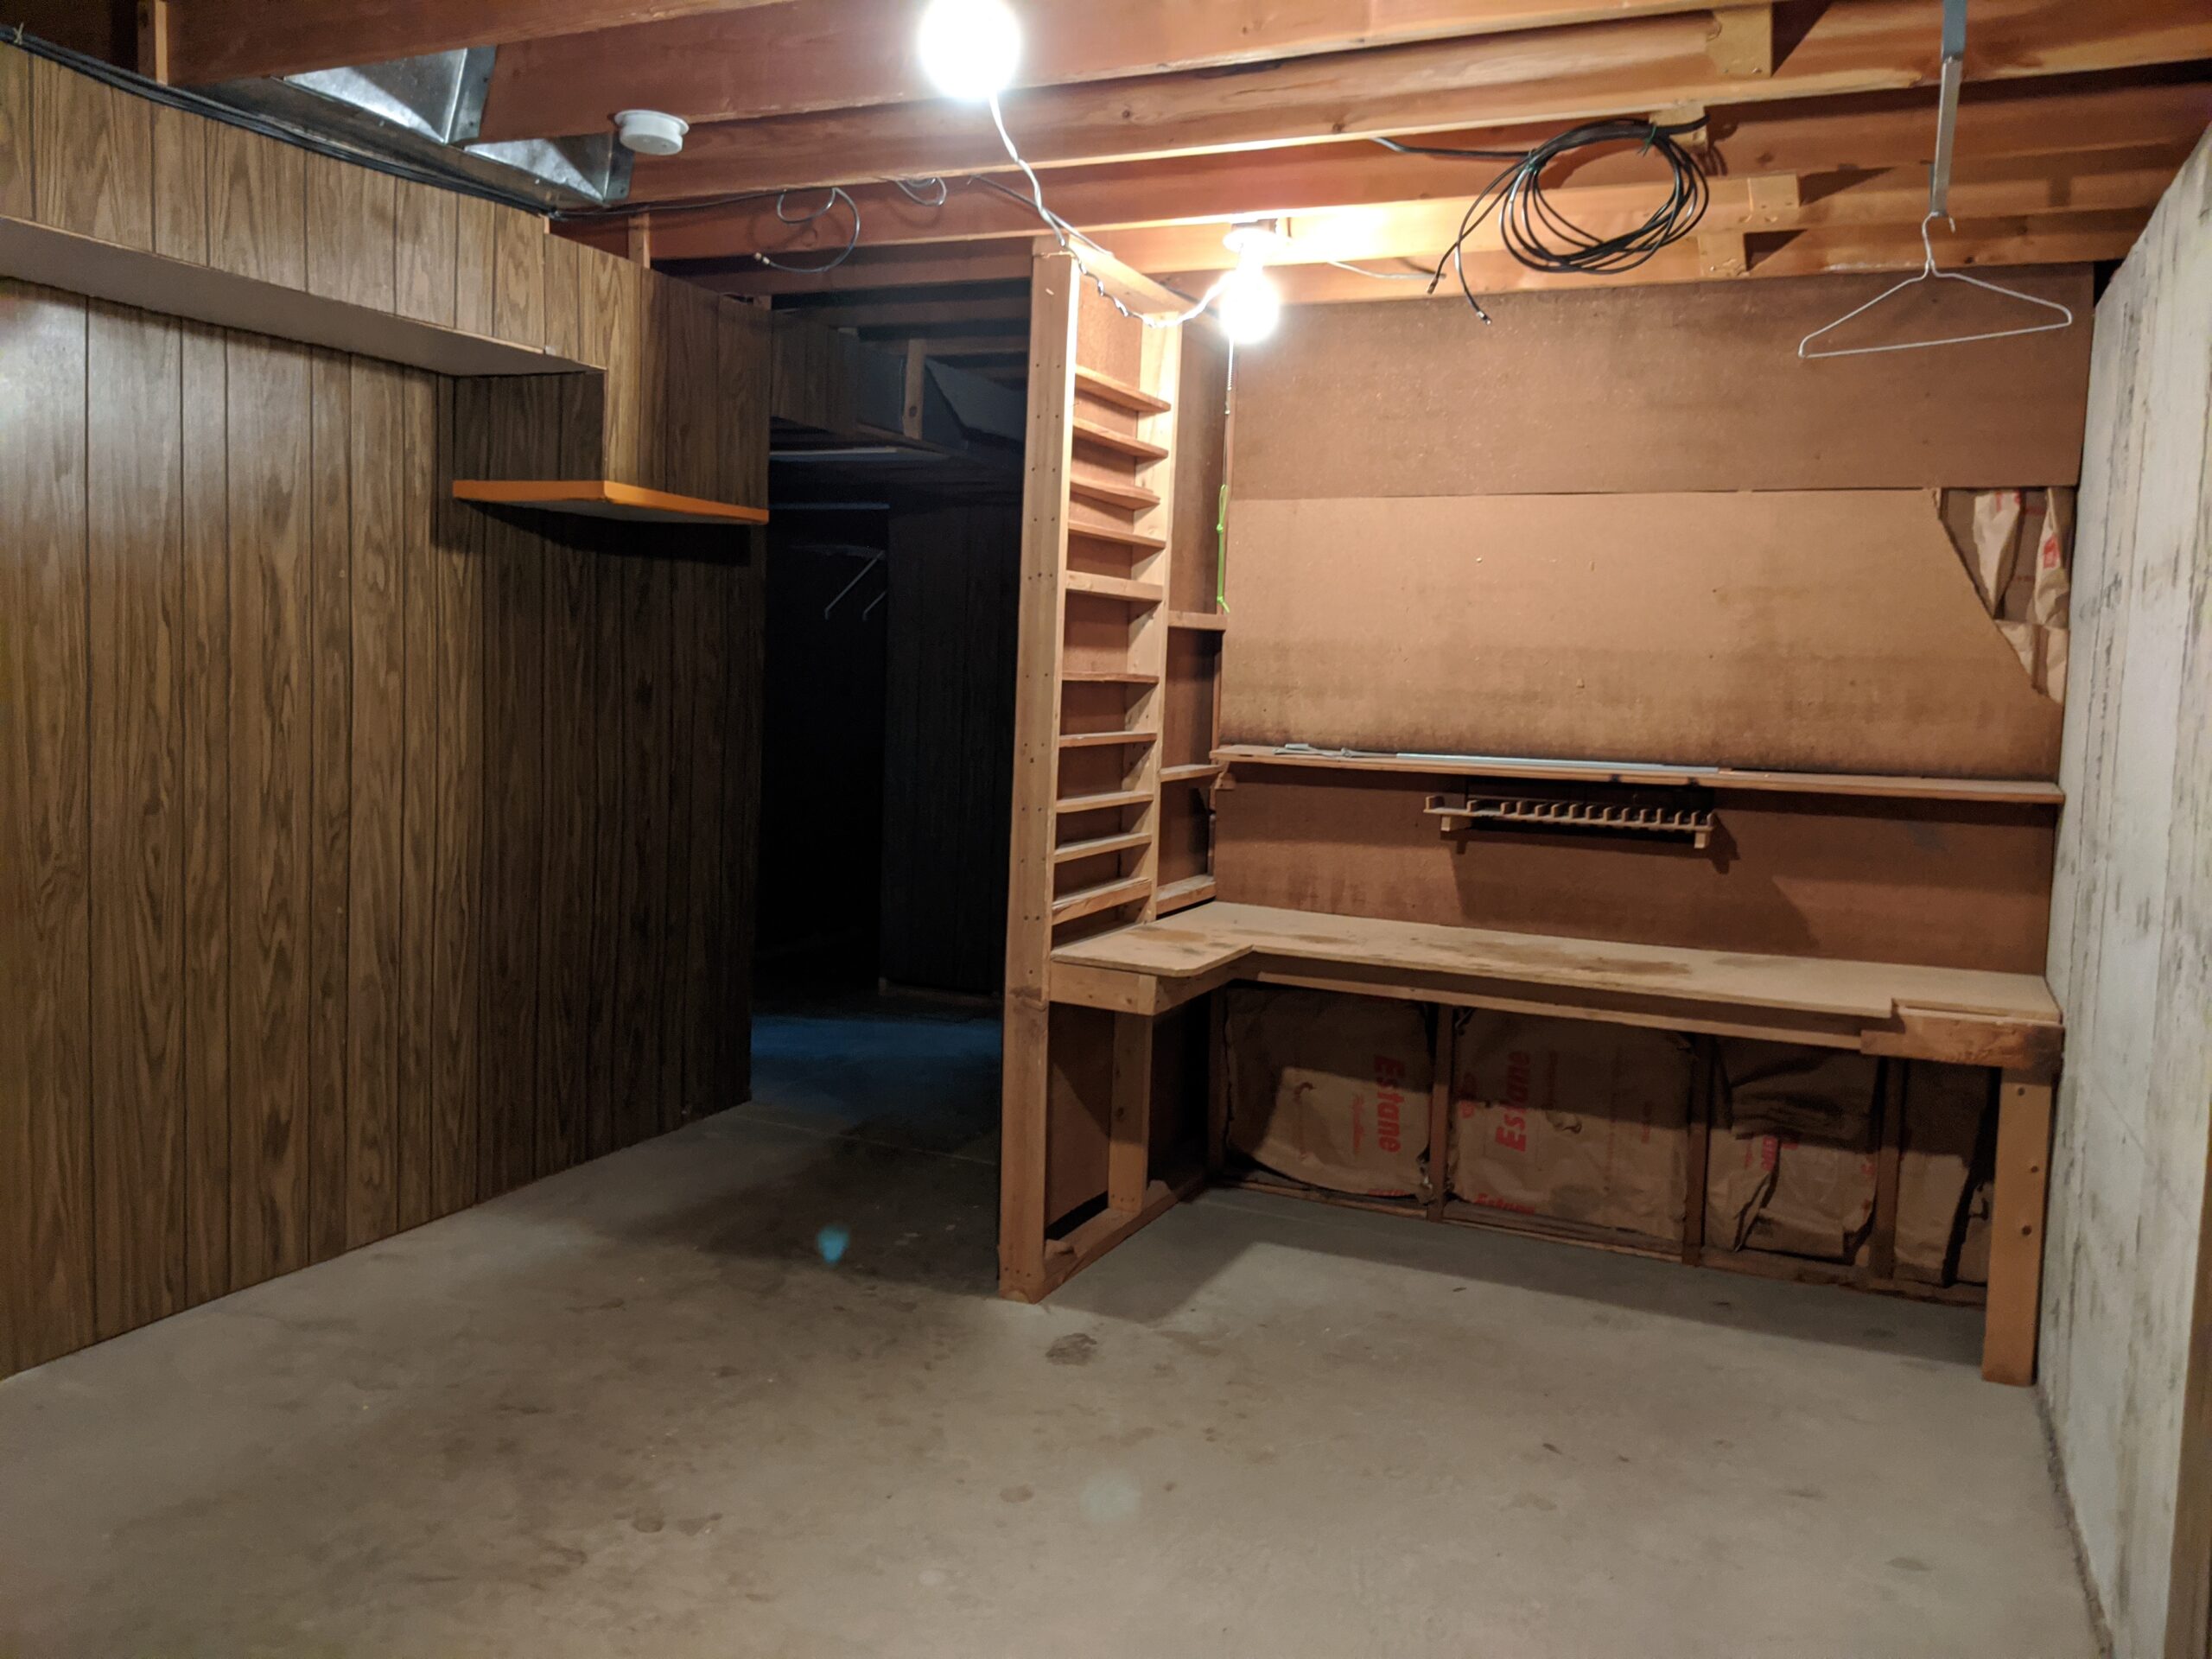 Does this count as a finished basement? What’s the definition of a legal bedroom?